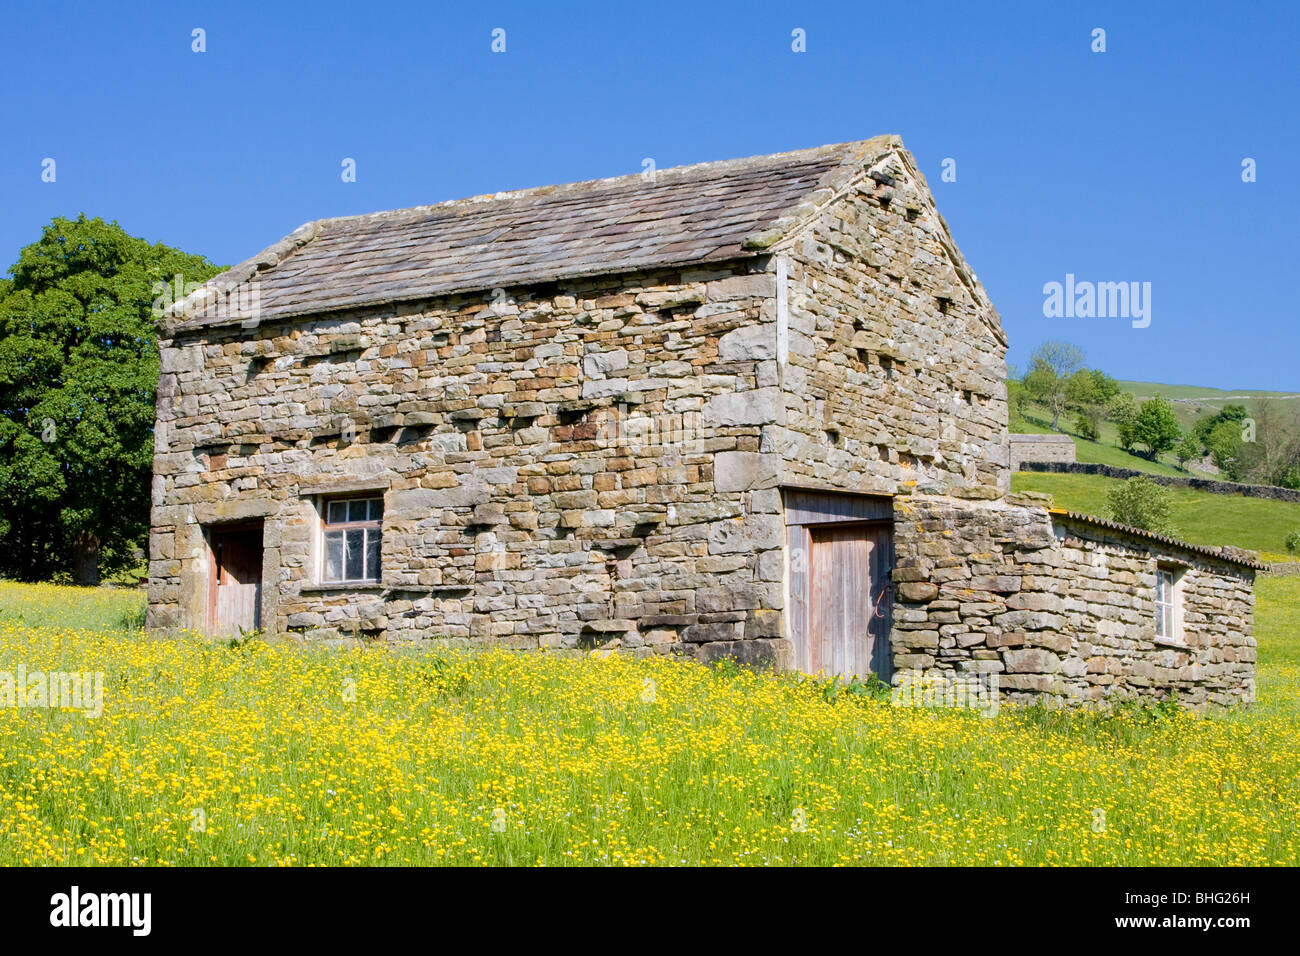 Barn in hay meadow at Muker, Yorkshire Dales, UK Stock Photo